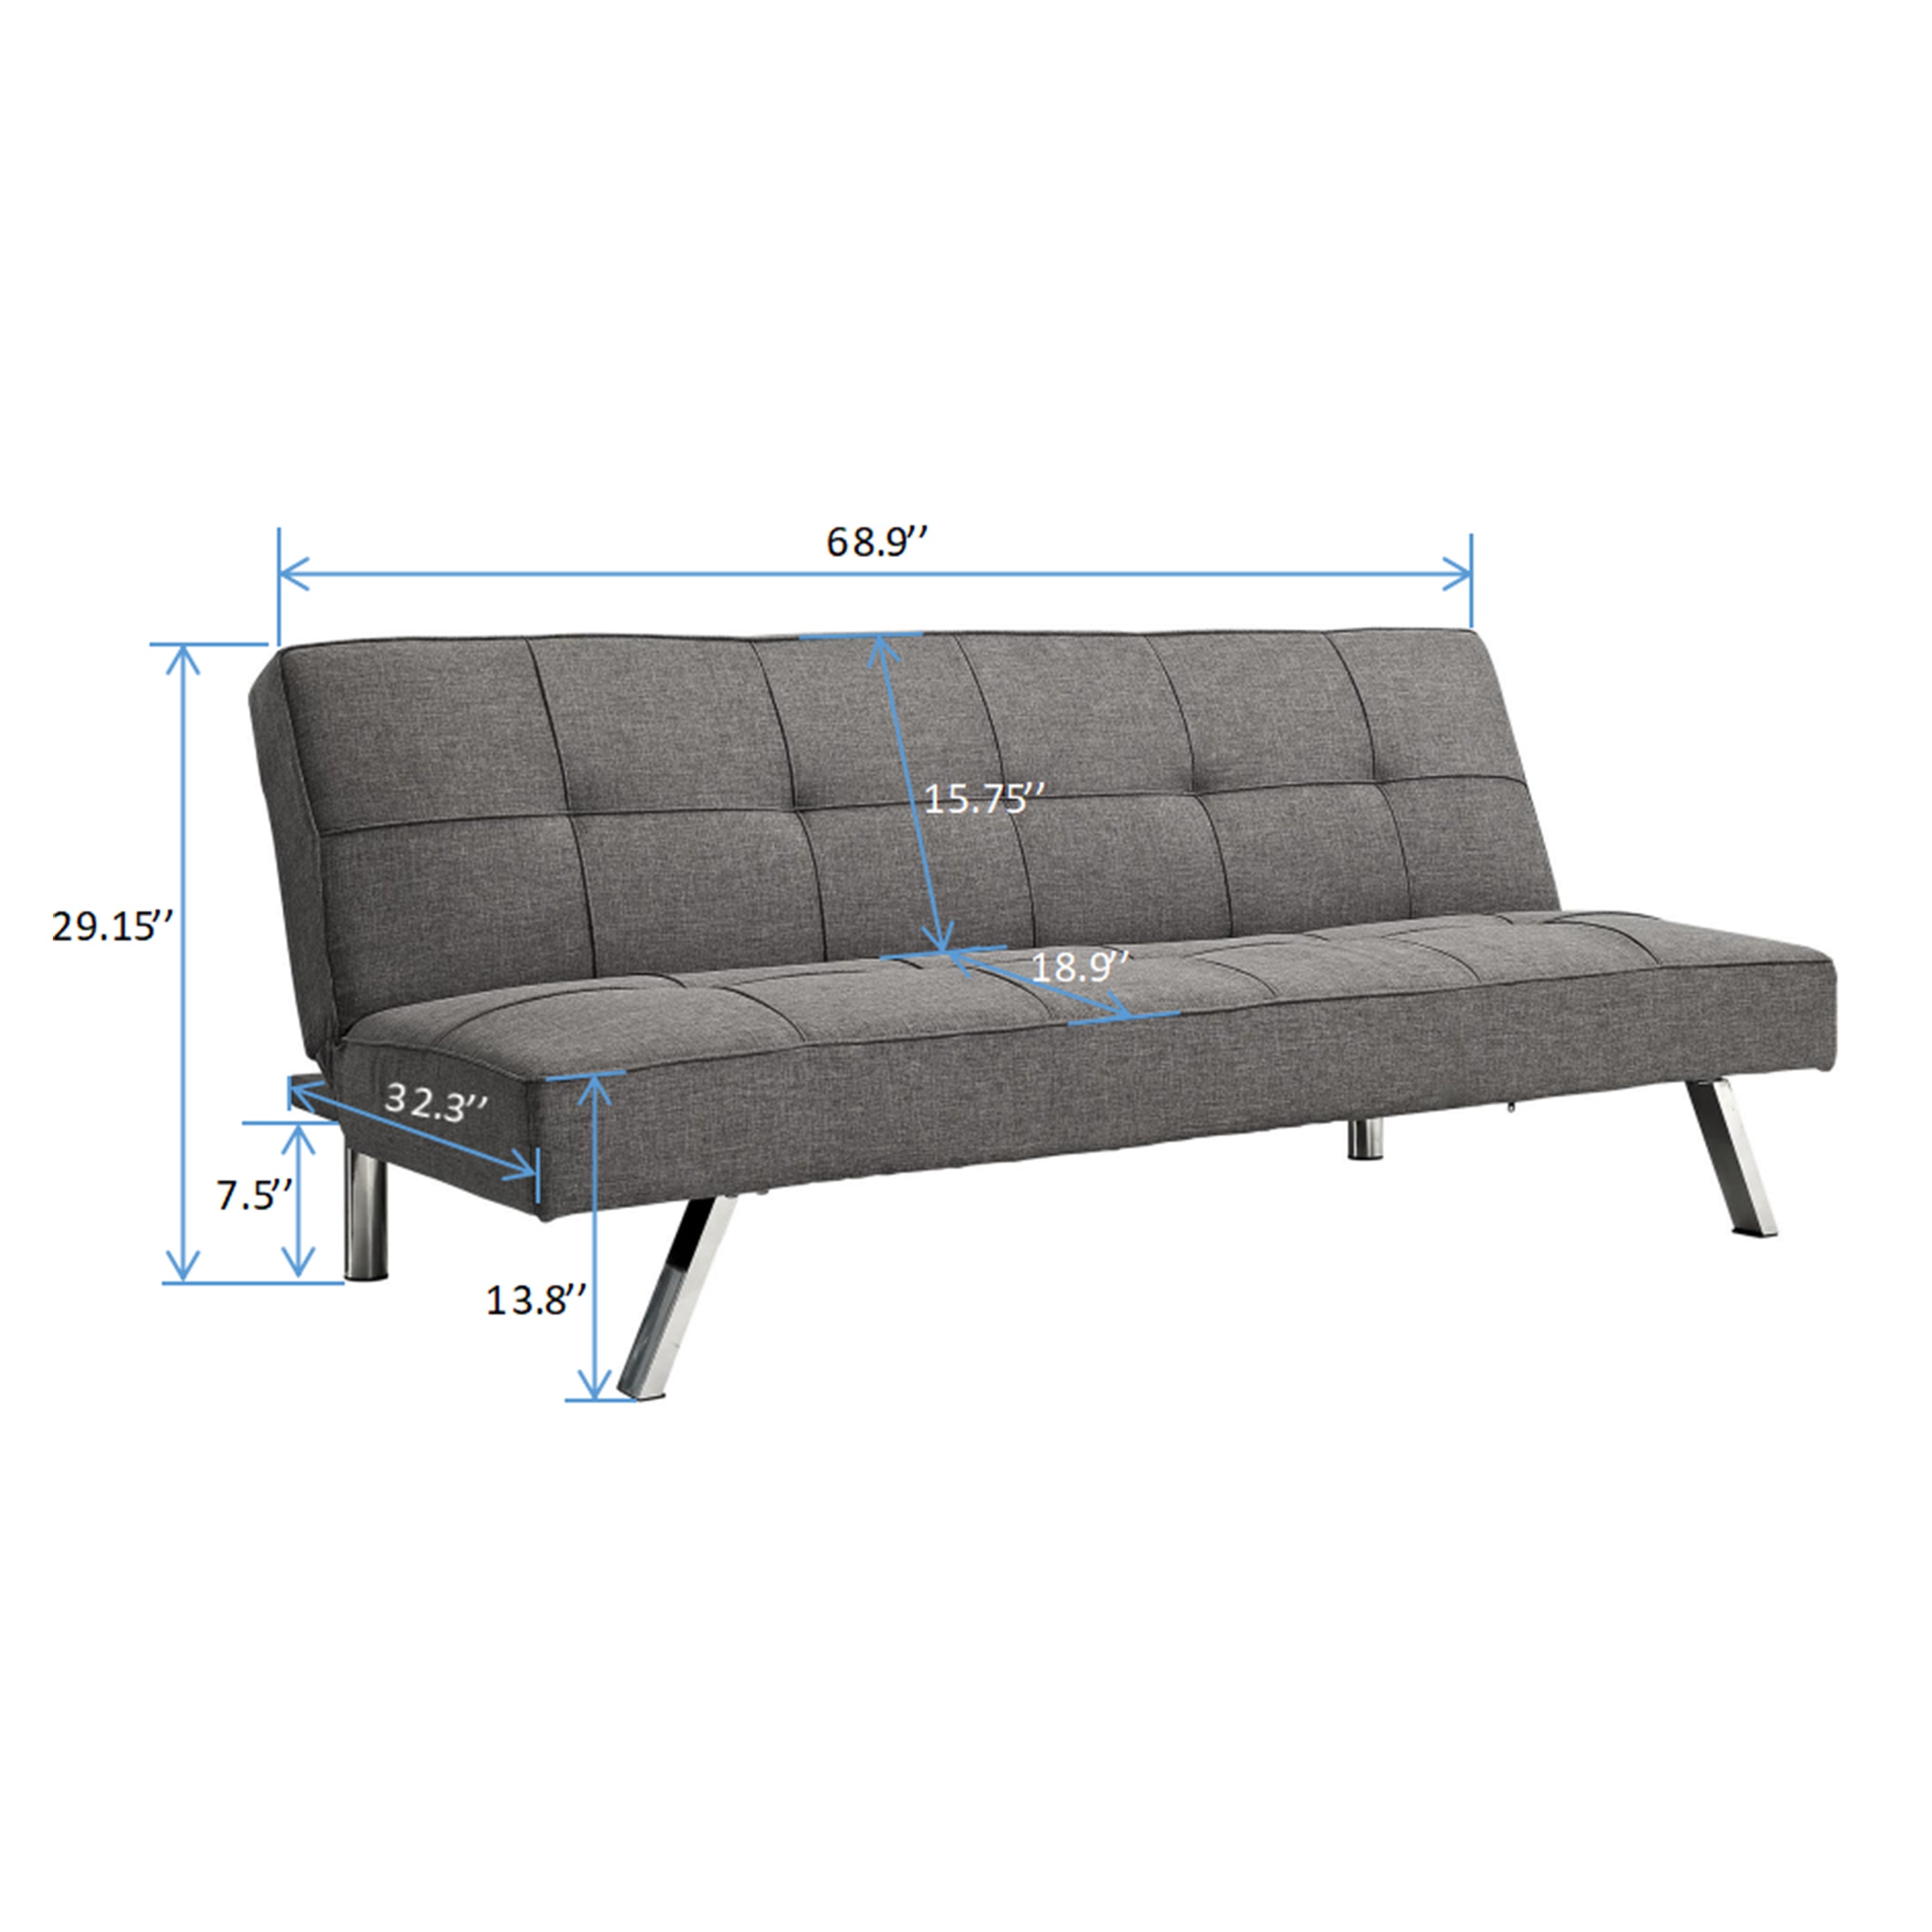 Futon Sofa Bed with Reclining Backrest and Stainless Legs, Grey